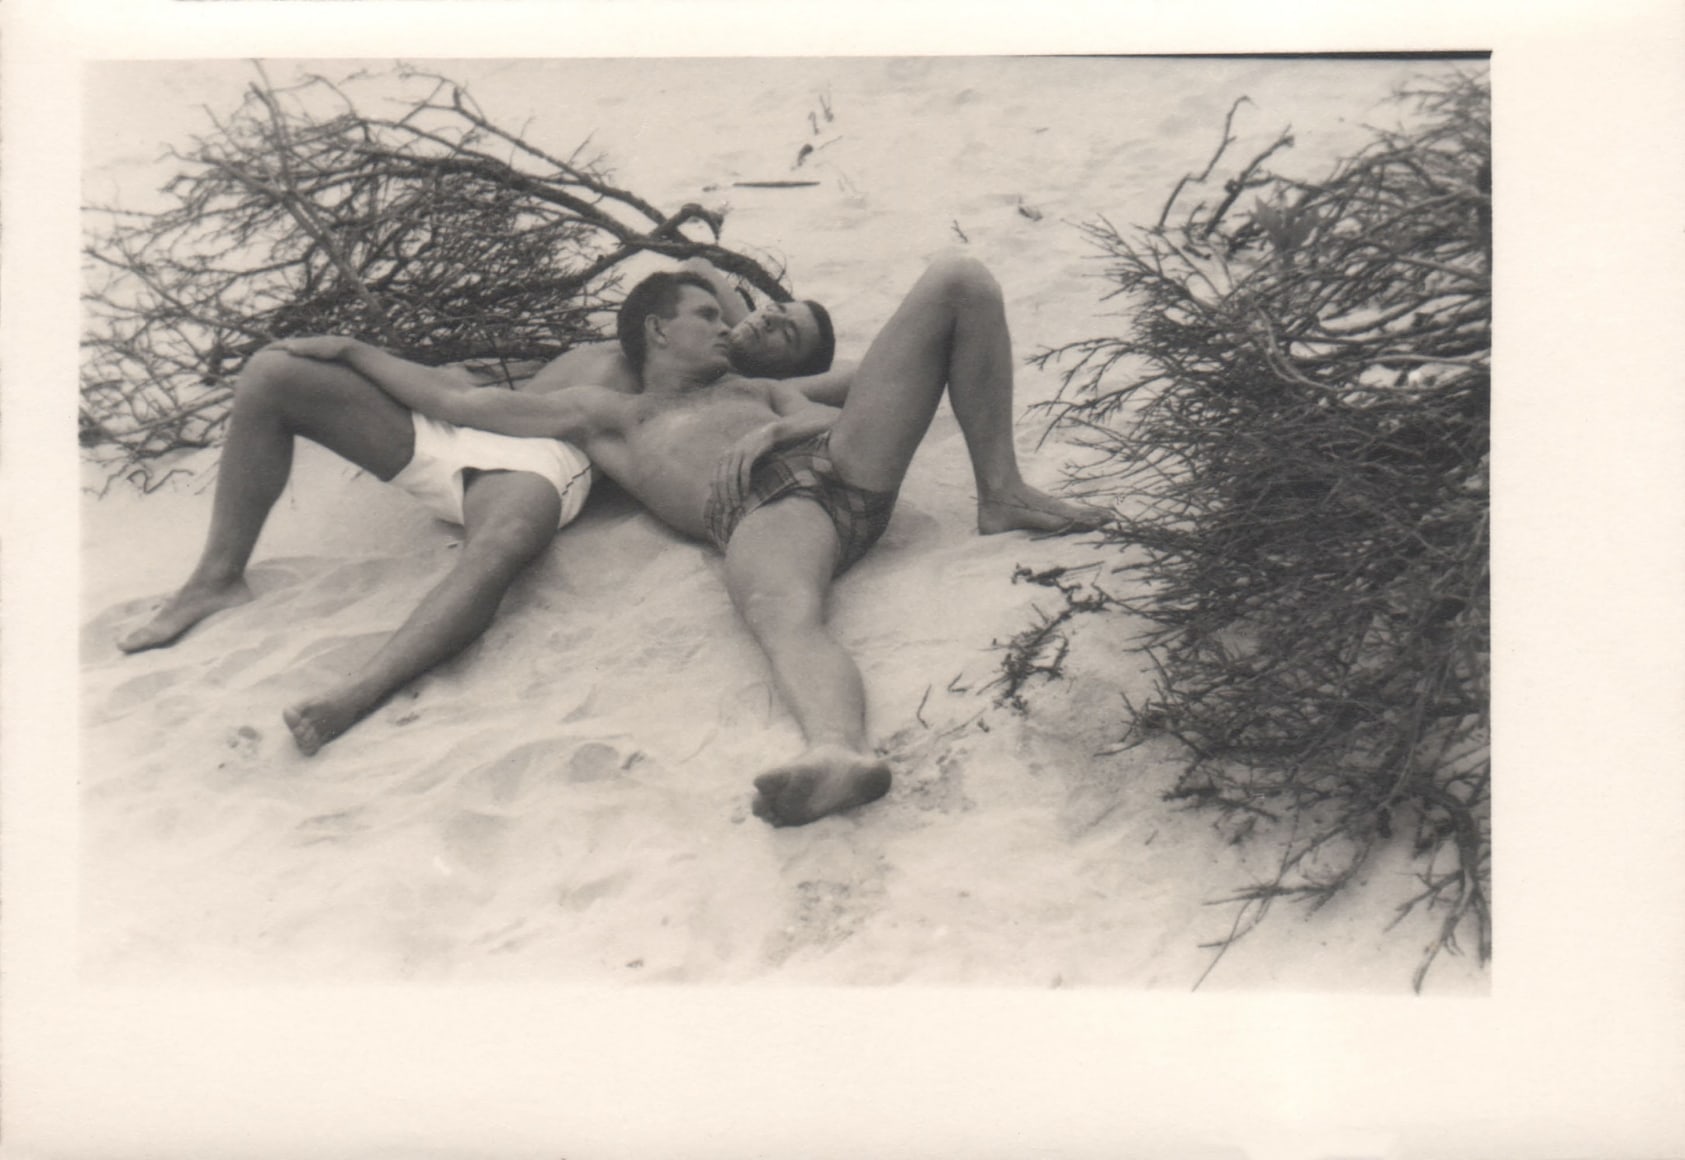 PaJaMa, Ted Starkowski, Chuck Howard, ​c. 1945. Two men in swimsuits lay on the beach, one leaning against the other's chest. Each has one leg bent and one extended.